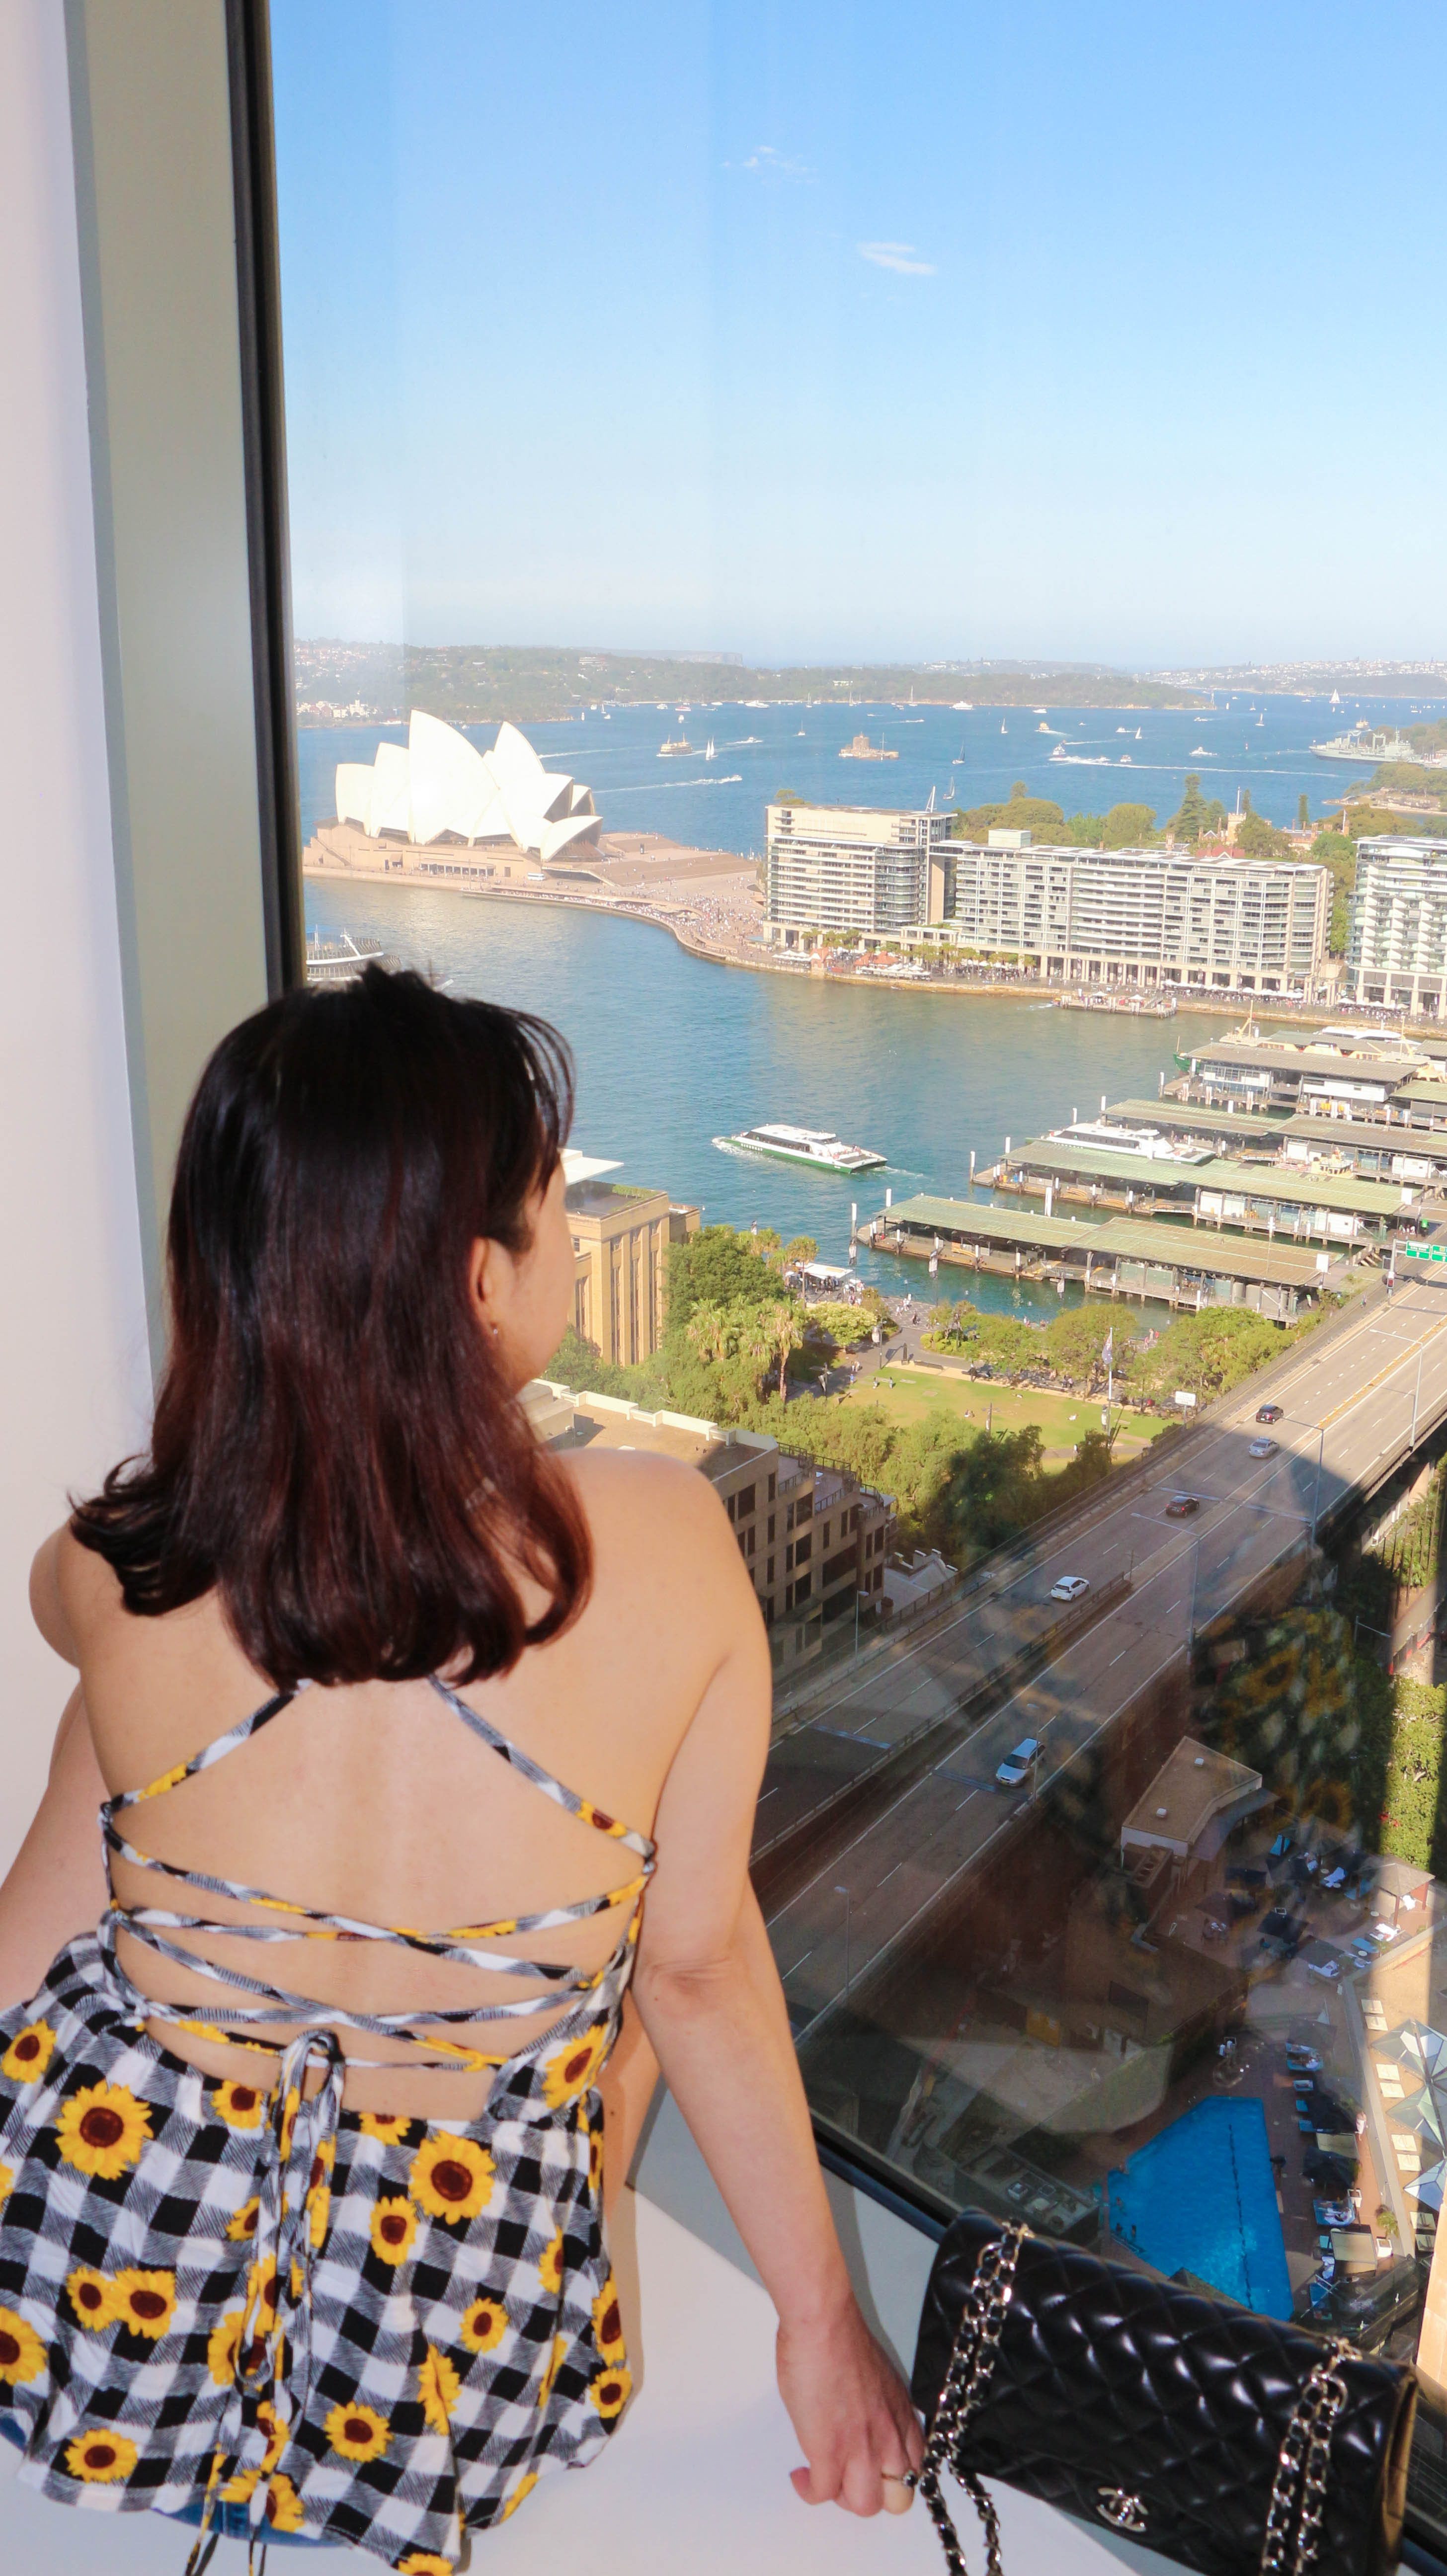 Where to stay in Sydney